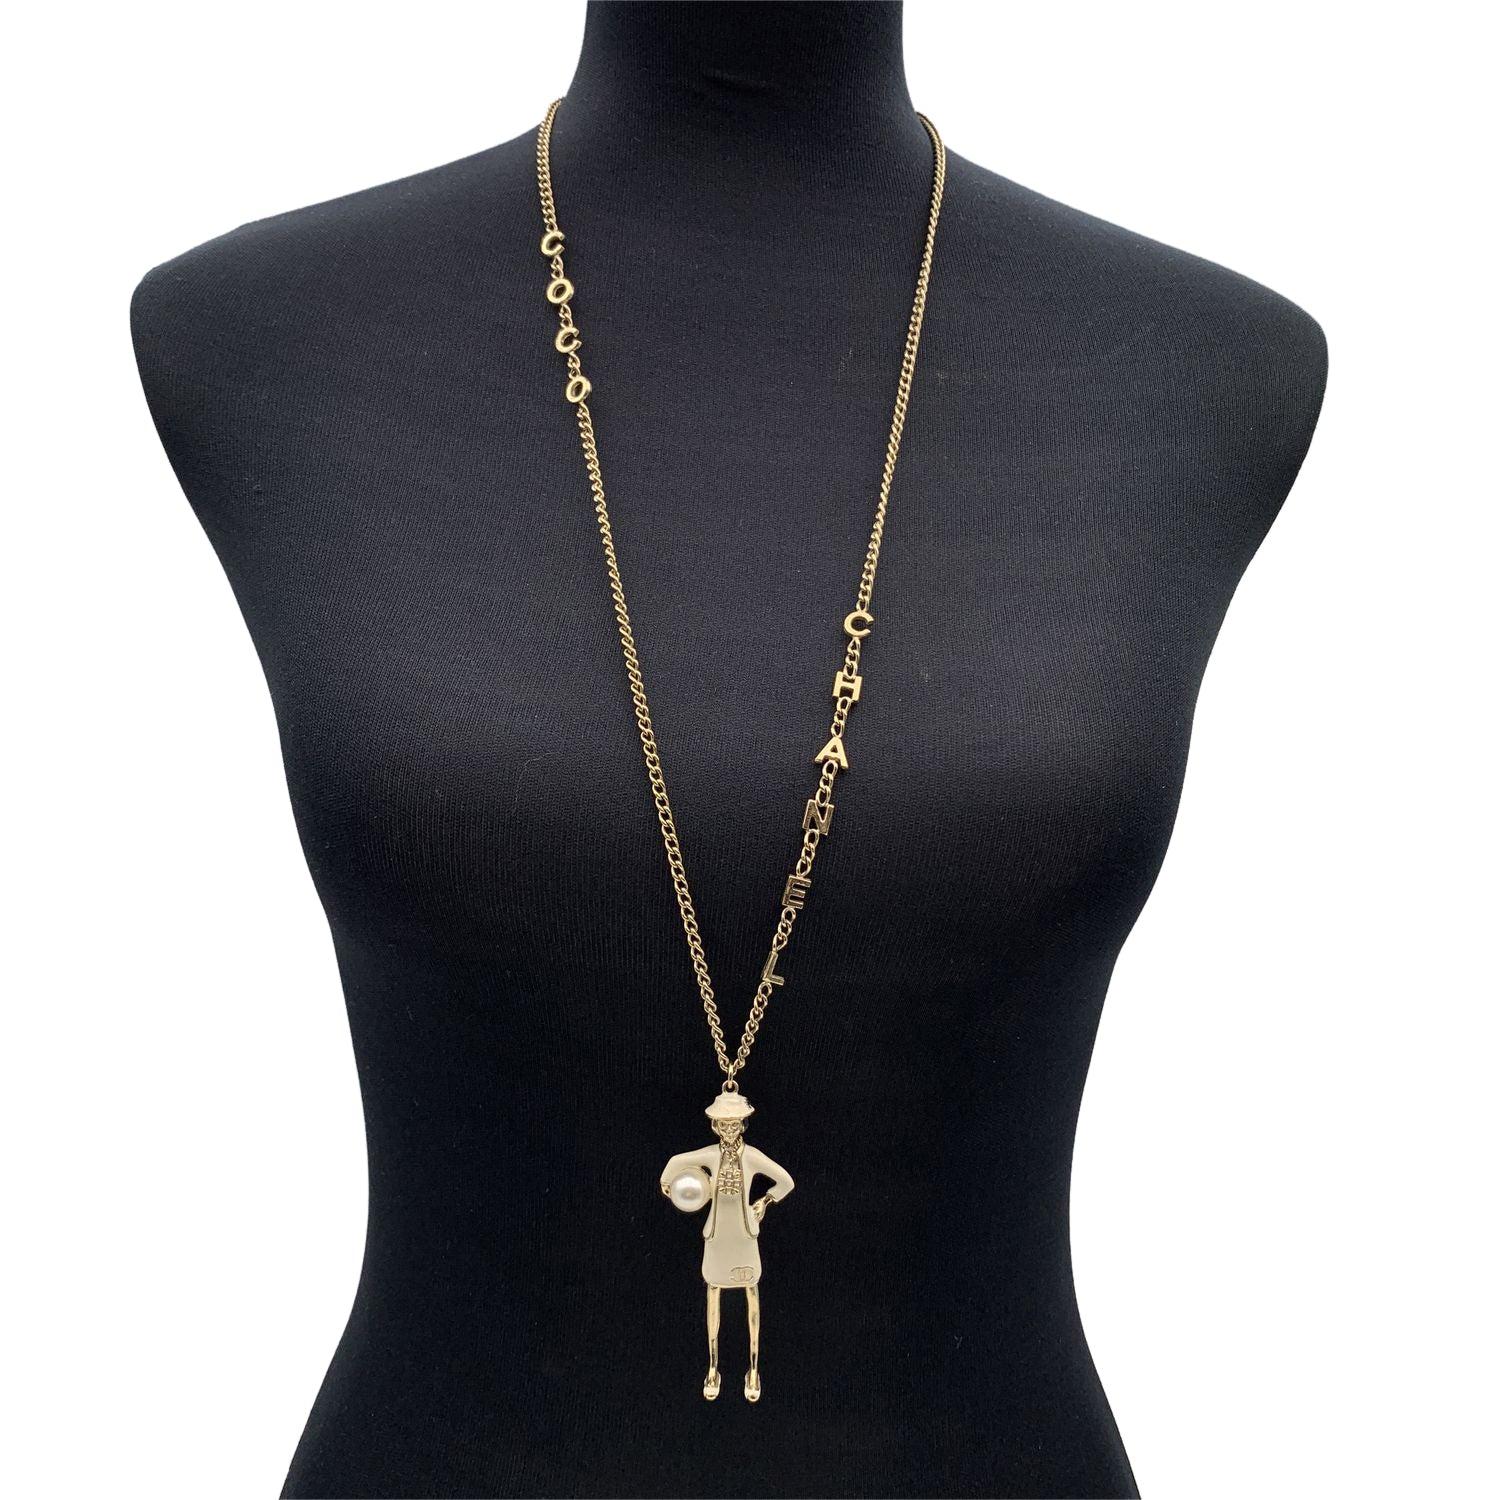 Light gold metal long chain necklace with Mademoiselle Coco pendant by CHANEL. Silver metal mademoiselle Coco figurine holding a pearl with beige enamel. C.H.A.N.E.L. letters on the chain. Lobster closure. Pendant's max height: 3 inches - 7.6 cm.